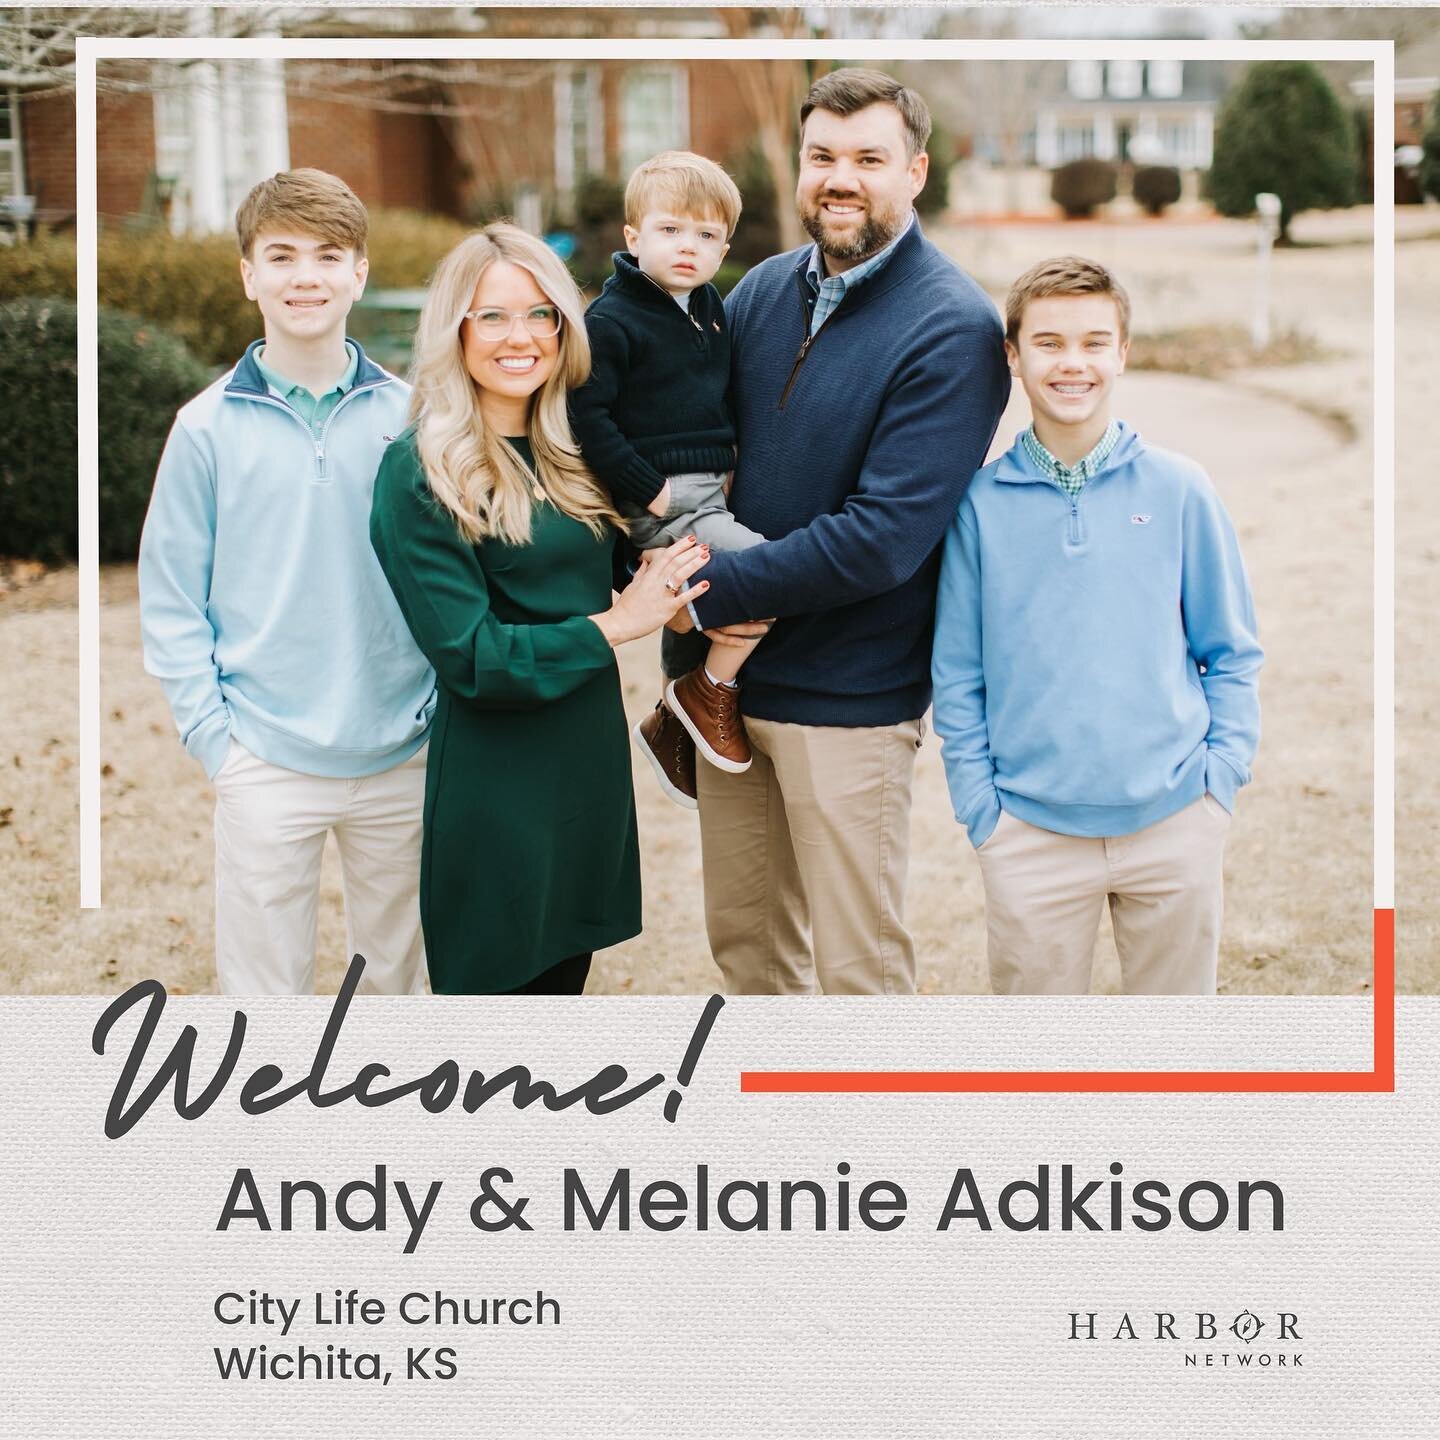 Please welcome Andy &amp; Melanie Adkison and @citylifewichita to Harbor Network! 

&quot;City Life Church was planted in the heart of Wichita, Kansas in 2011. Five years later, City Life and First Baptist Church united together under City Life's nam